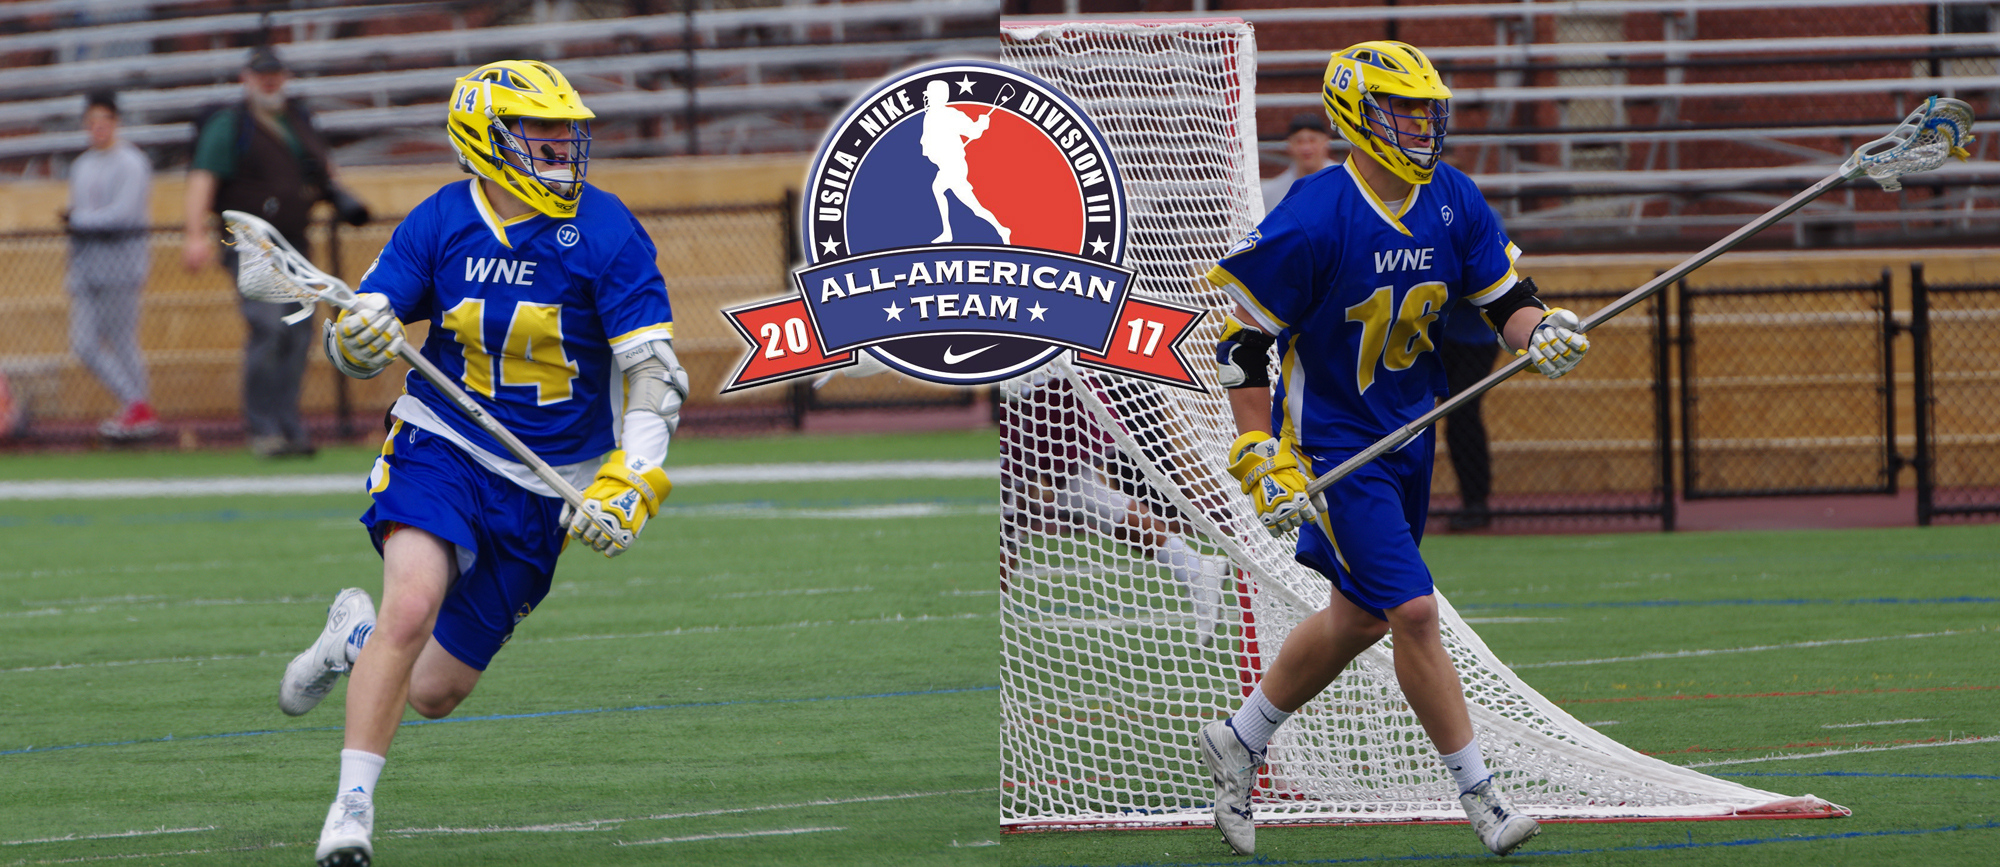 Seniors Keegan Dudeck (left) and Steven Patrie (right) both earned honorable mention All-America honors from USILA/Nike.